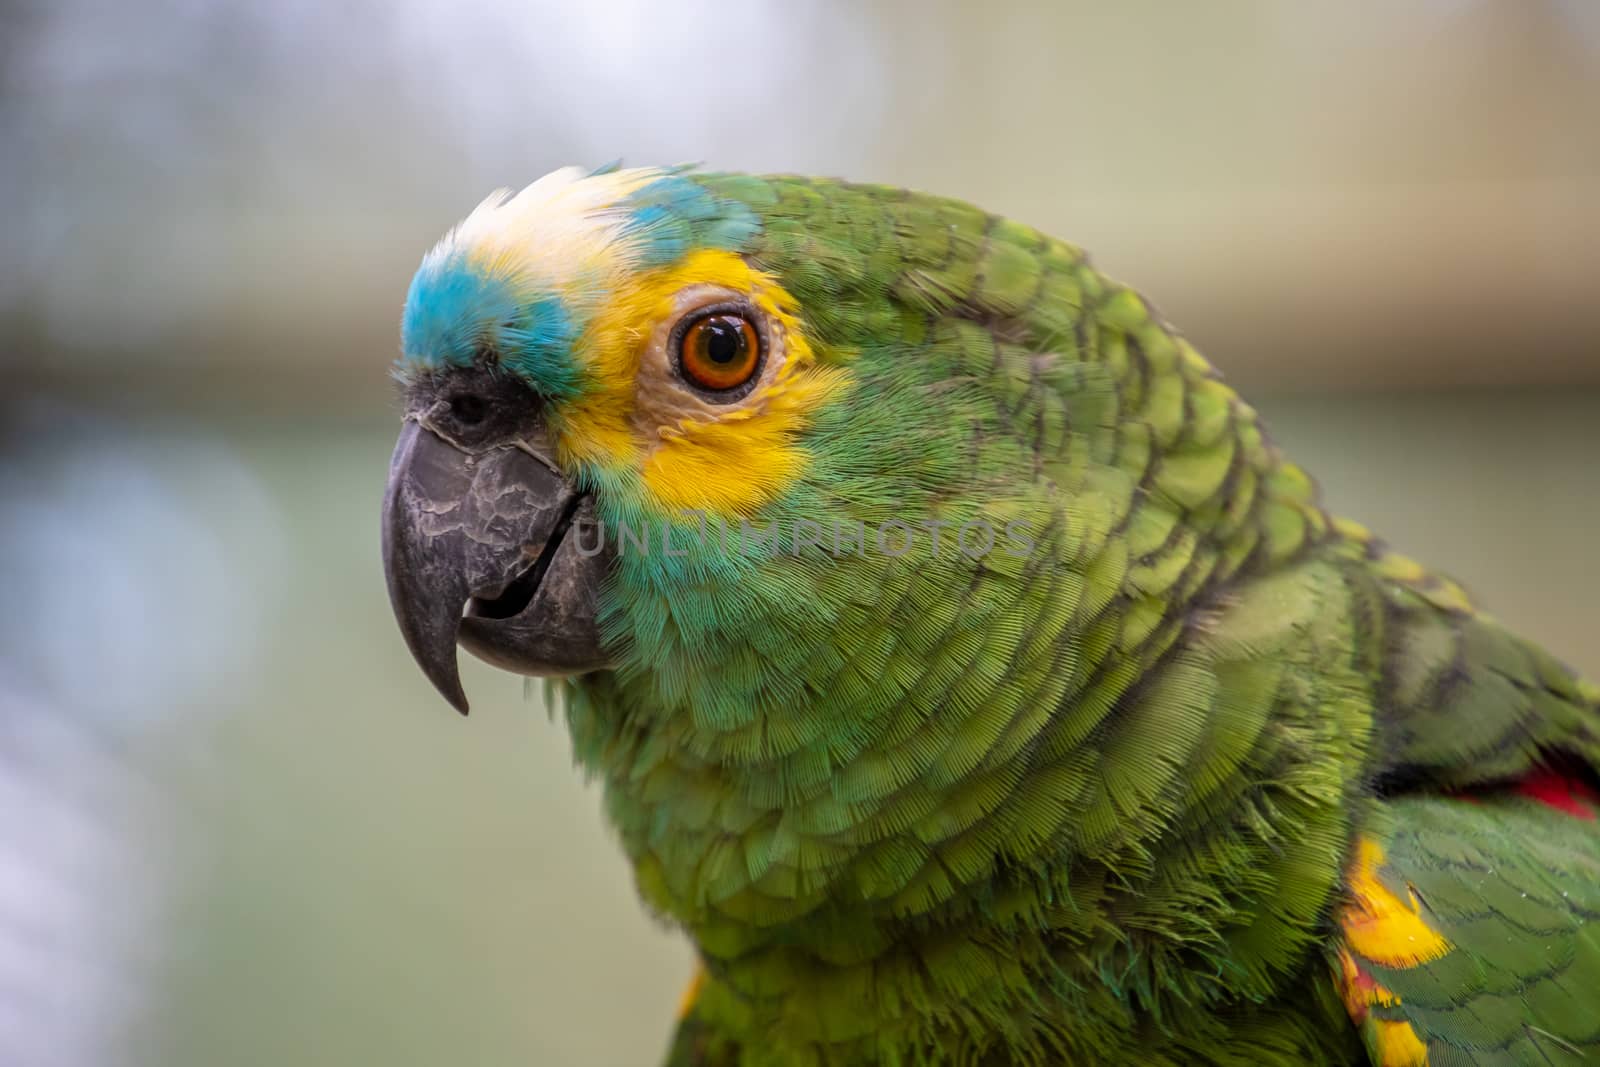 Green parrot popinjay close up with blue and yellow feathers